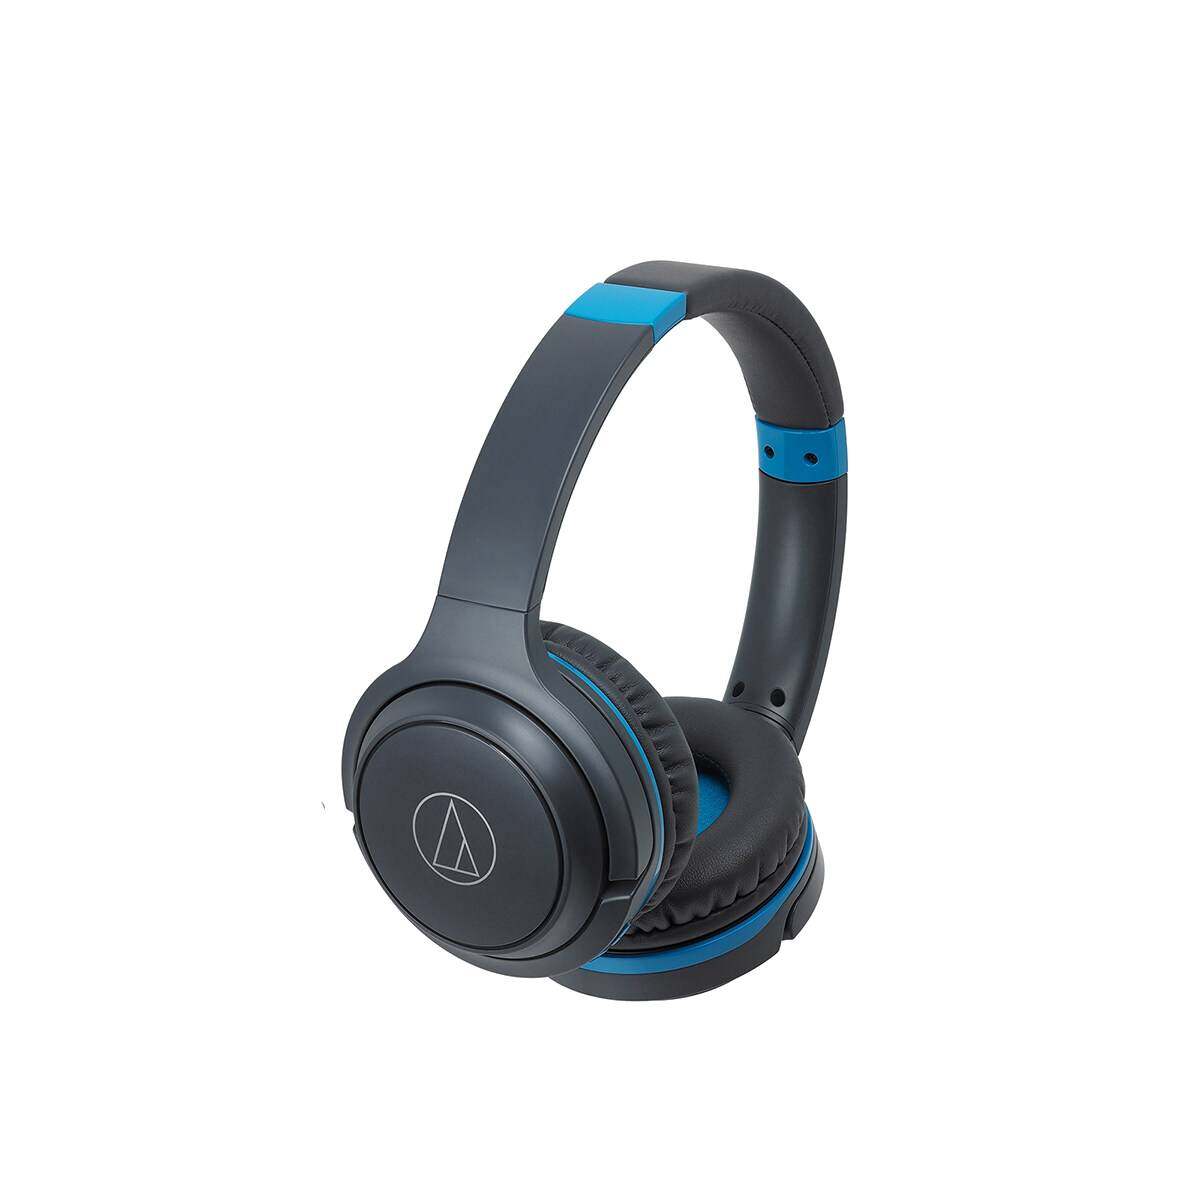 Audio-Technica Wireless Headsets ATH-S200BT with 40mm Driver, Bluetooth 4.1, 5 - 32,000 Hz Frequency, 40 Hours Battery Life